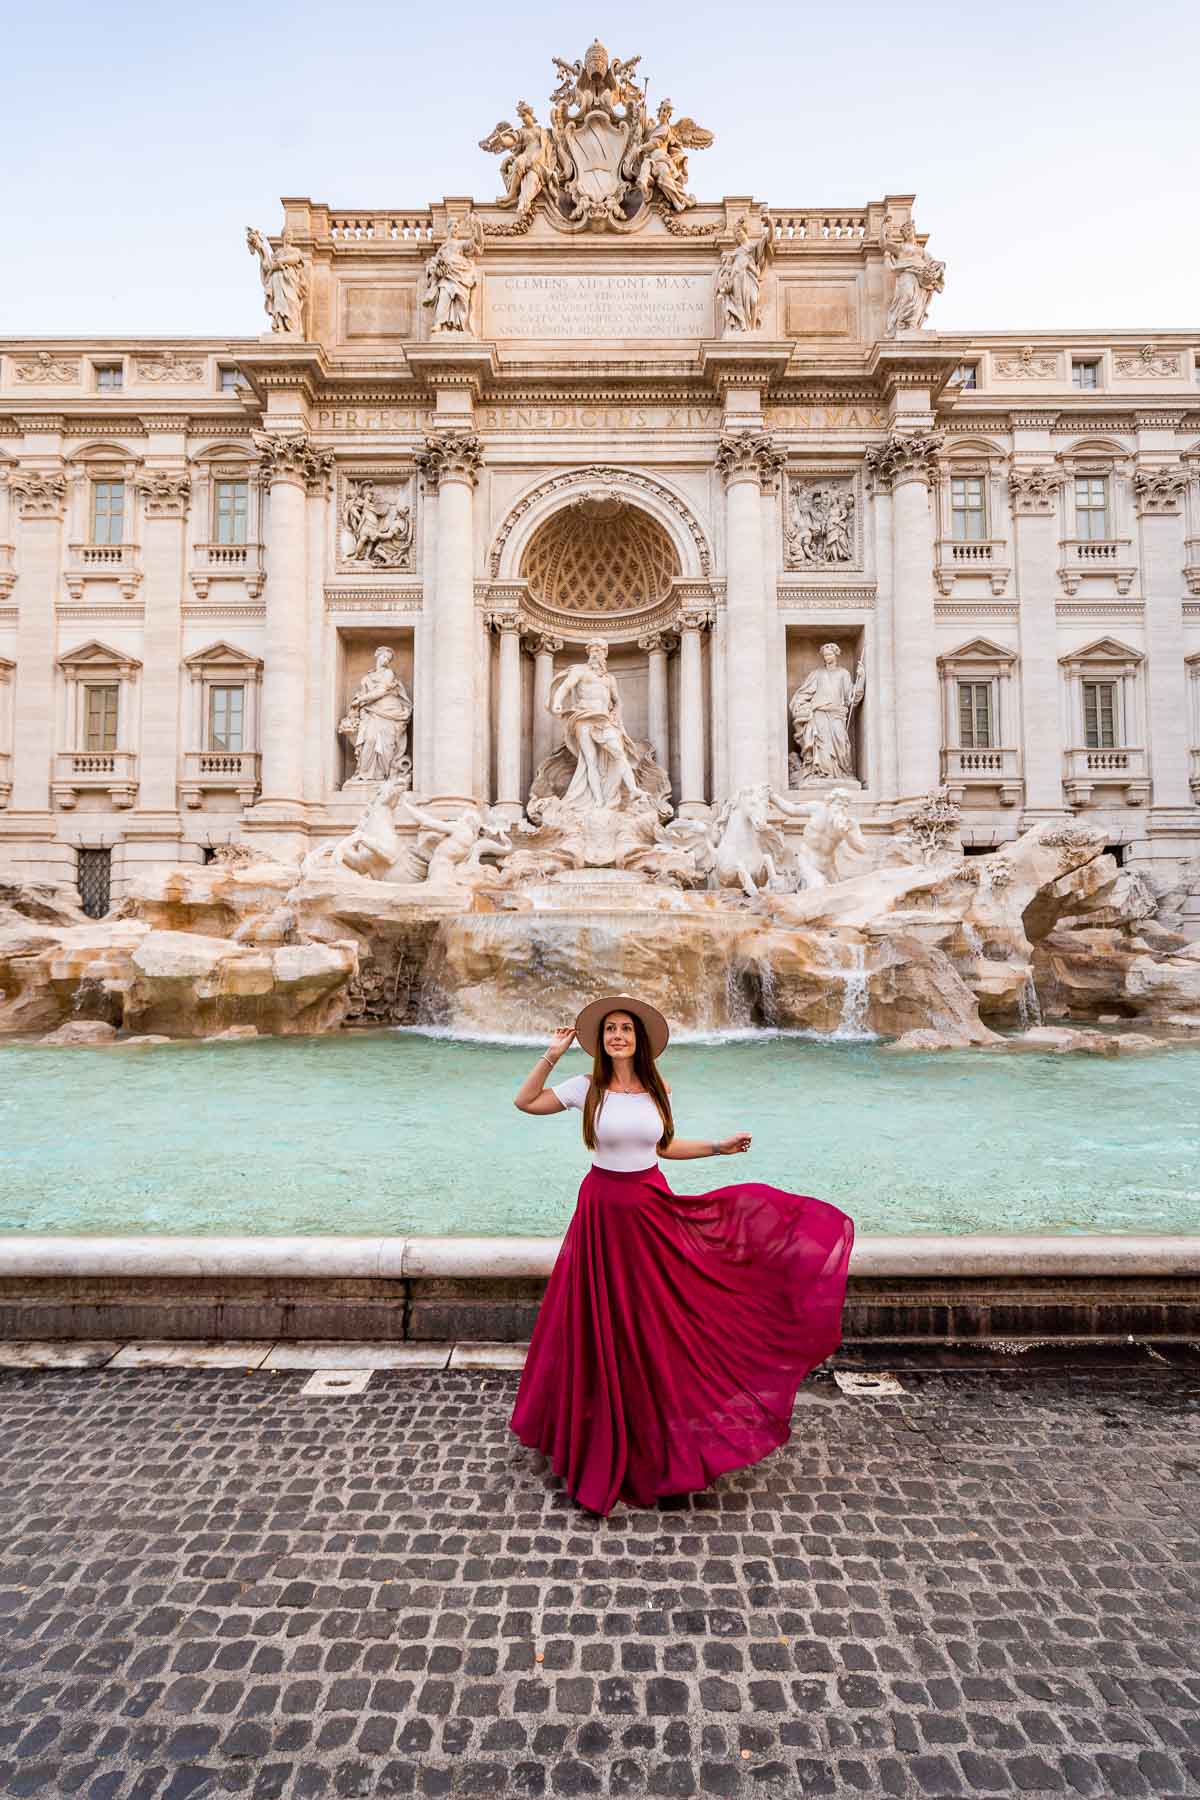 Girl in a red skirt in front of the Trevi Fountain in Rome, Italy